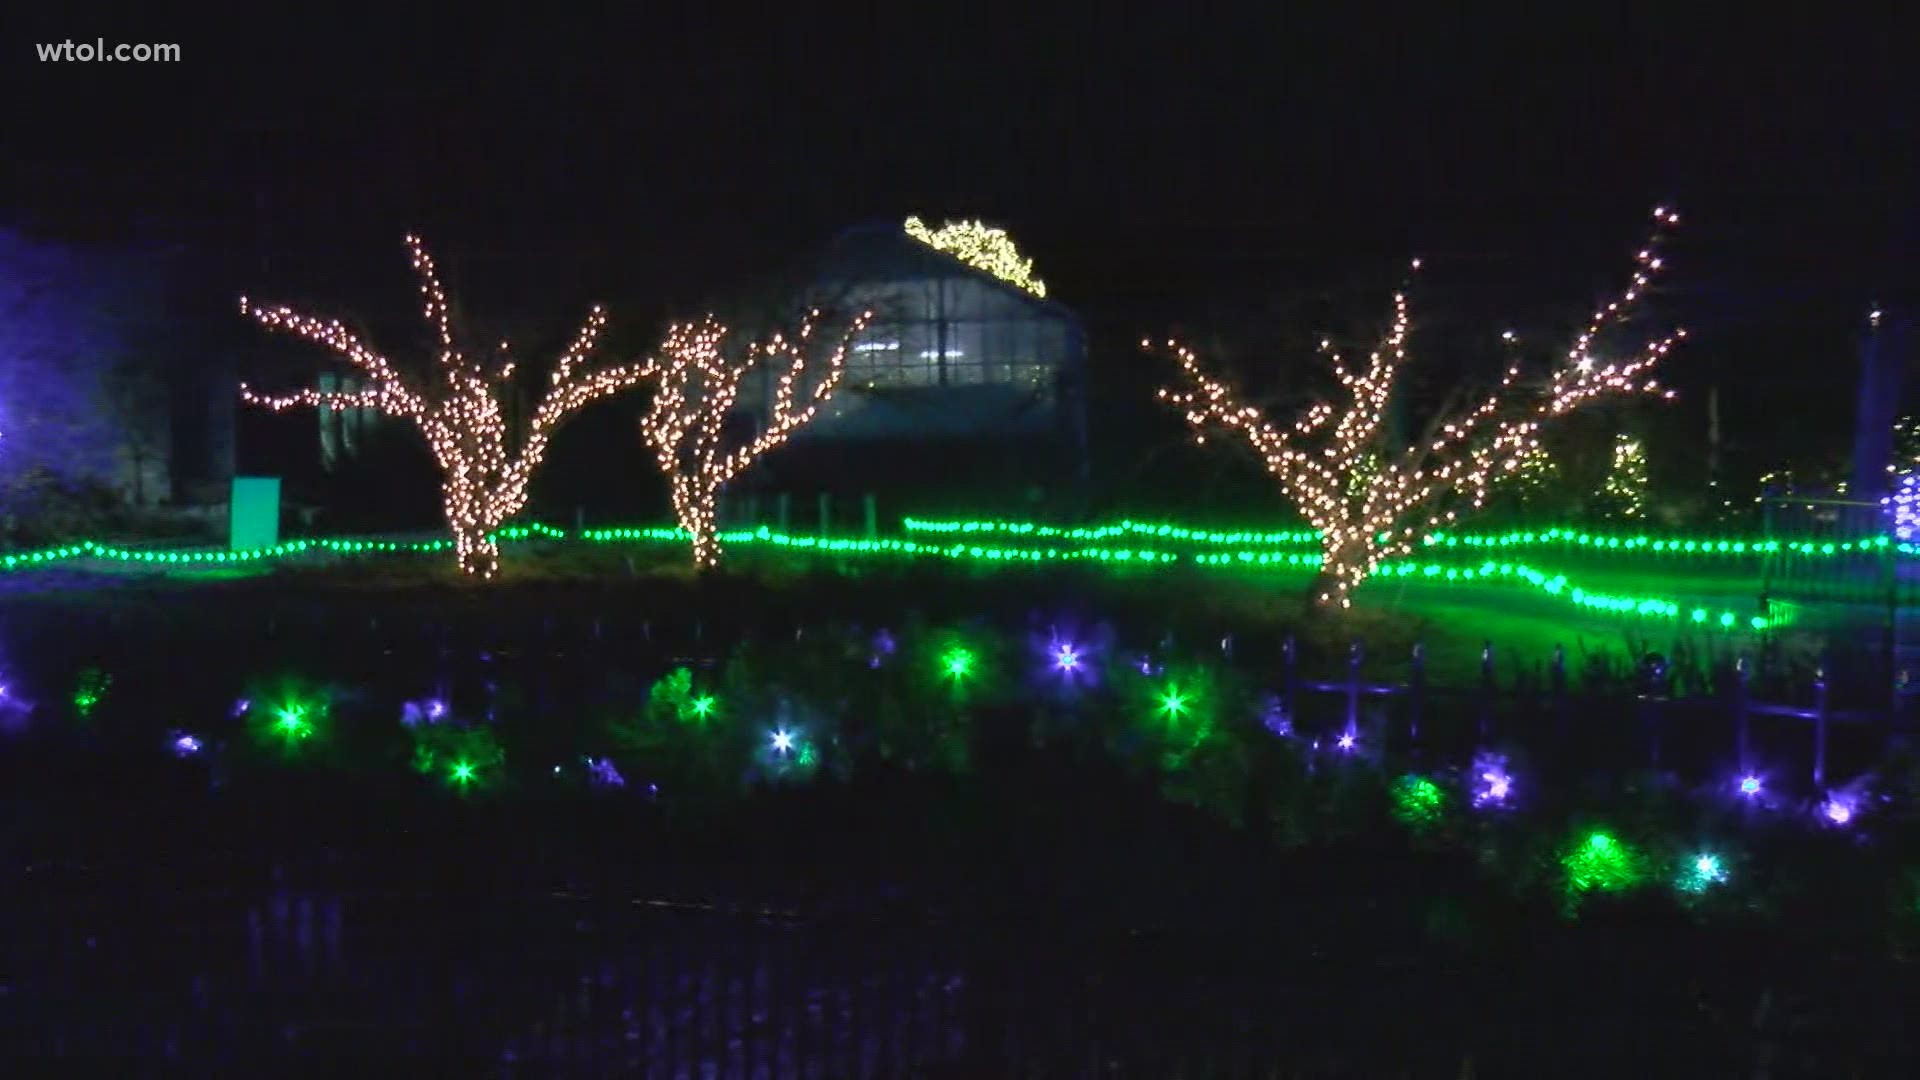 This is the 35th year for the award-winning zoo light display. Due to coronavirus, things will look a little different.